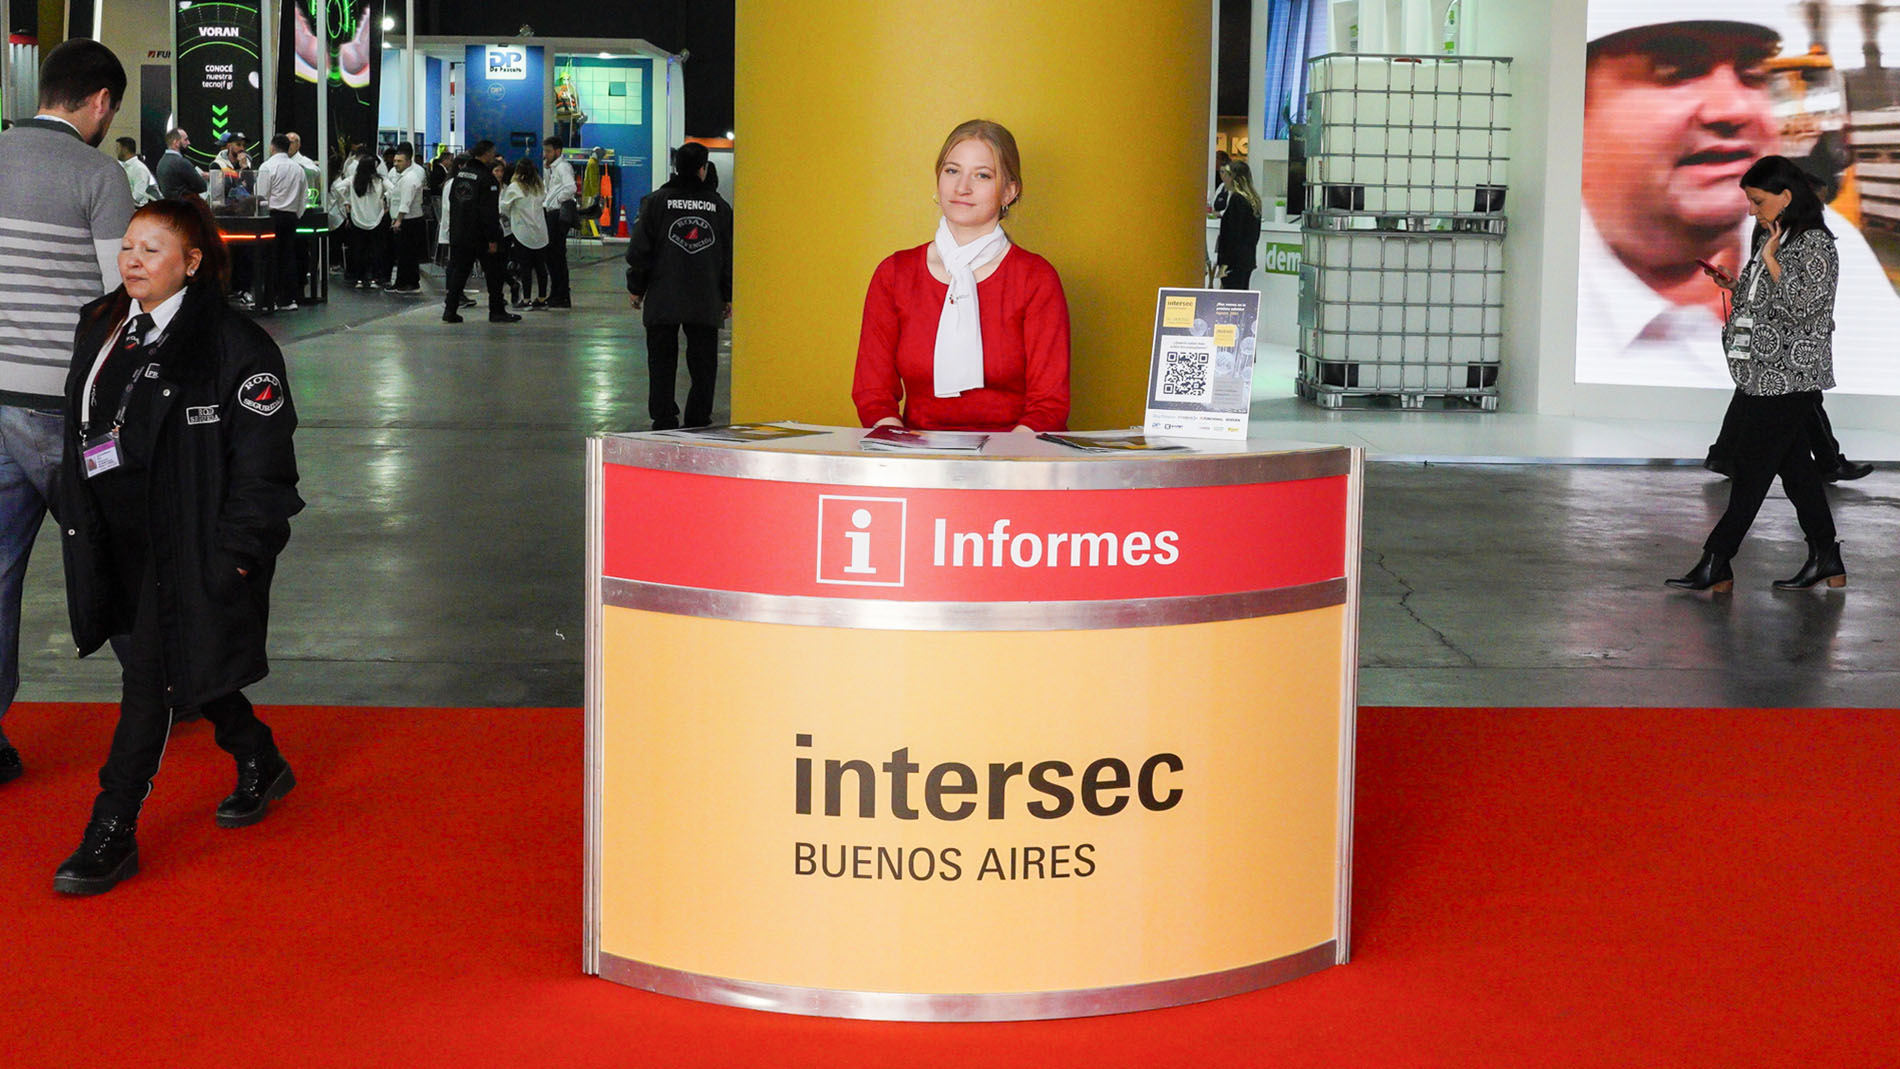 Intersec Buenos Aires: Information booths